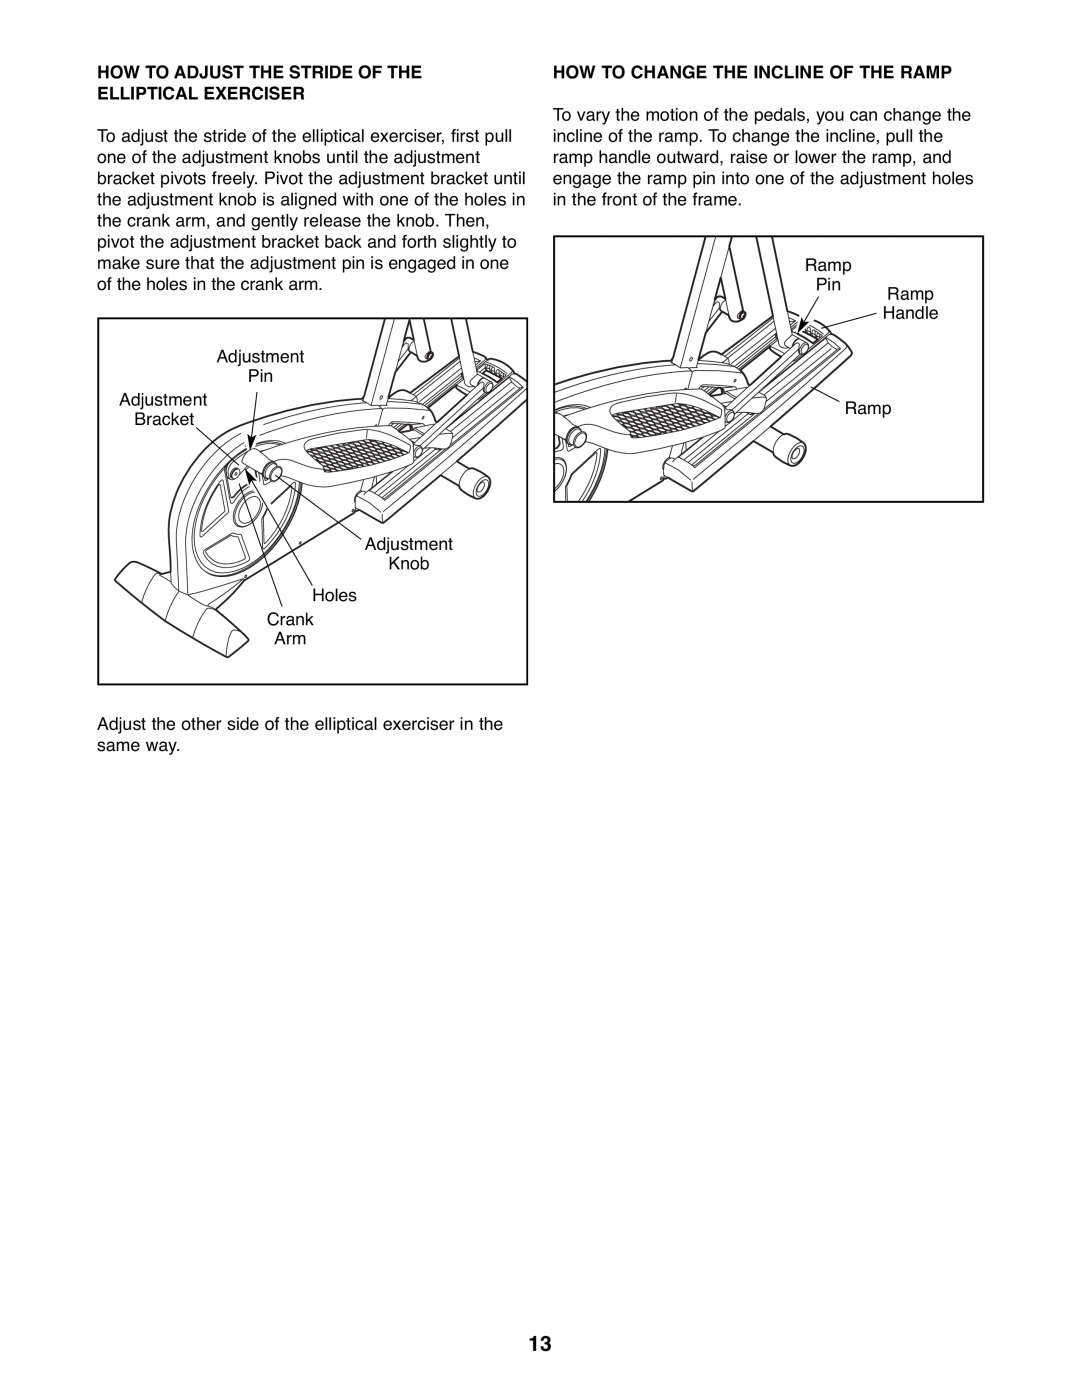 ProForm 831.23744.0 user manual How To Adjust The Stride Of The Elliptical Exerciser, How To Change The Incline Of The Ramp 